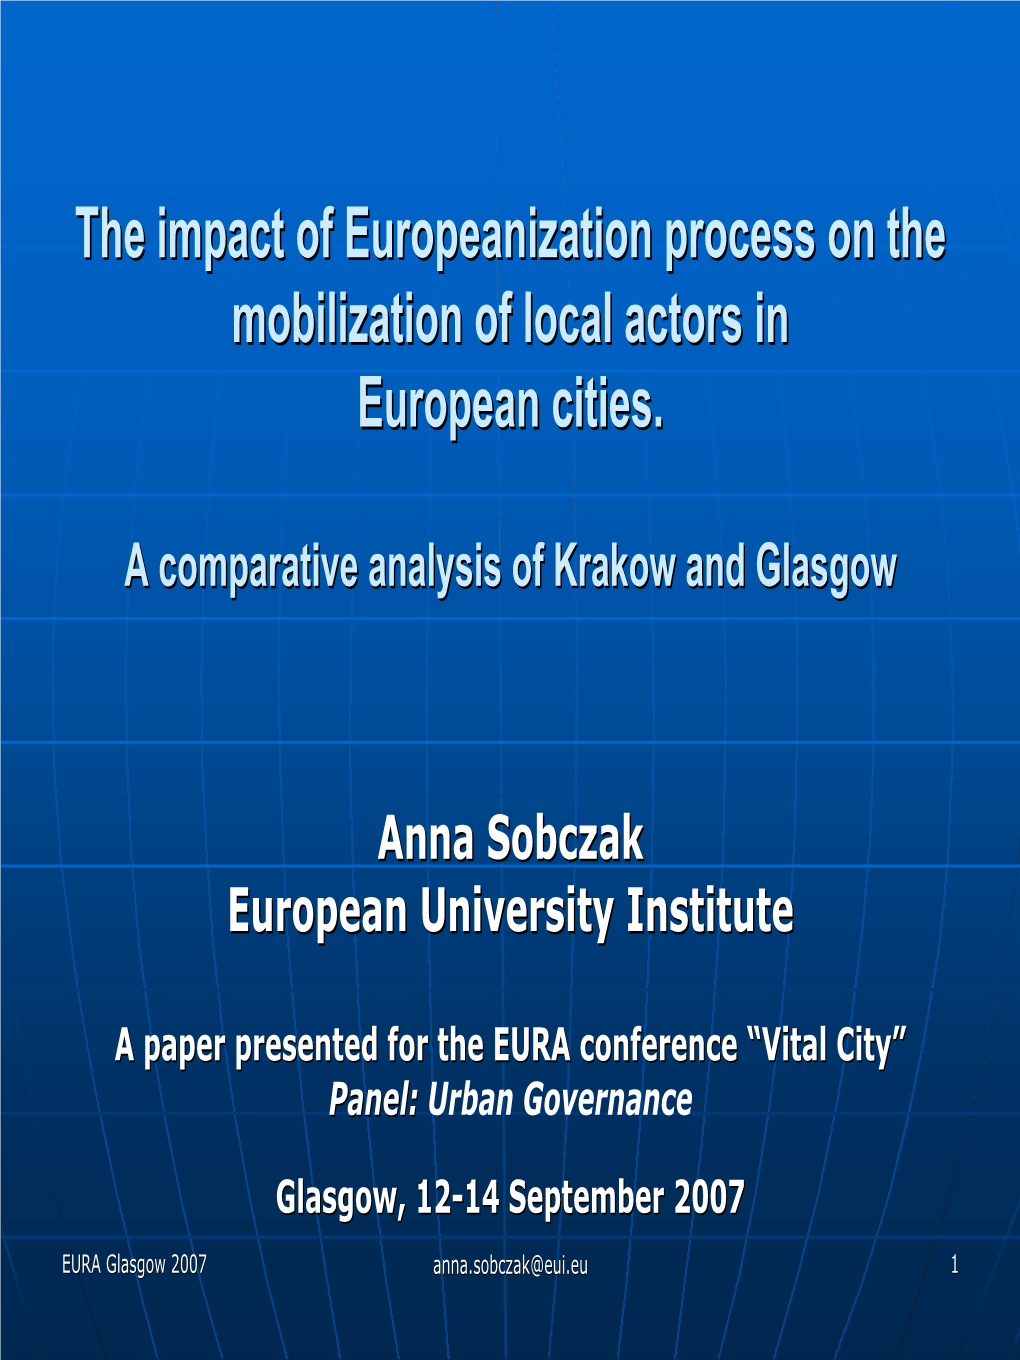 The Impact of Europeanization Process on the Mobilization of Local